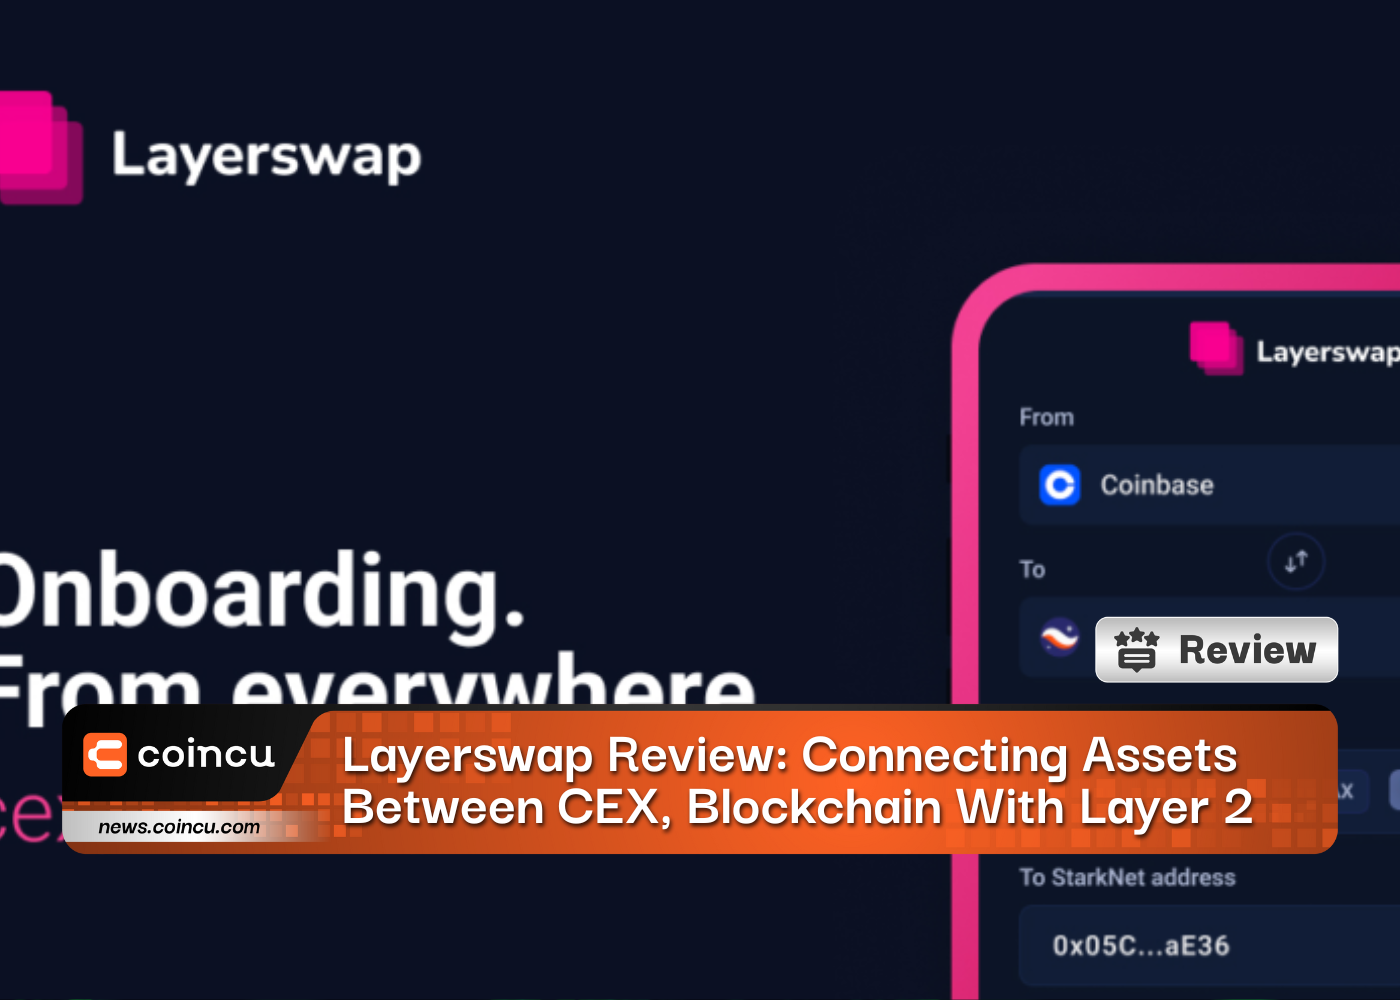 Layerswap Review: Solution Connecting Assets Between CEX, Blockchain With Layer 2